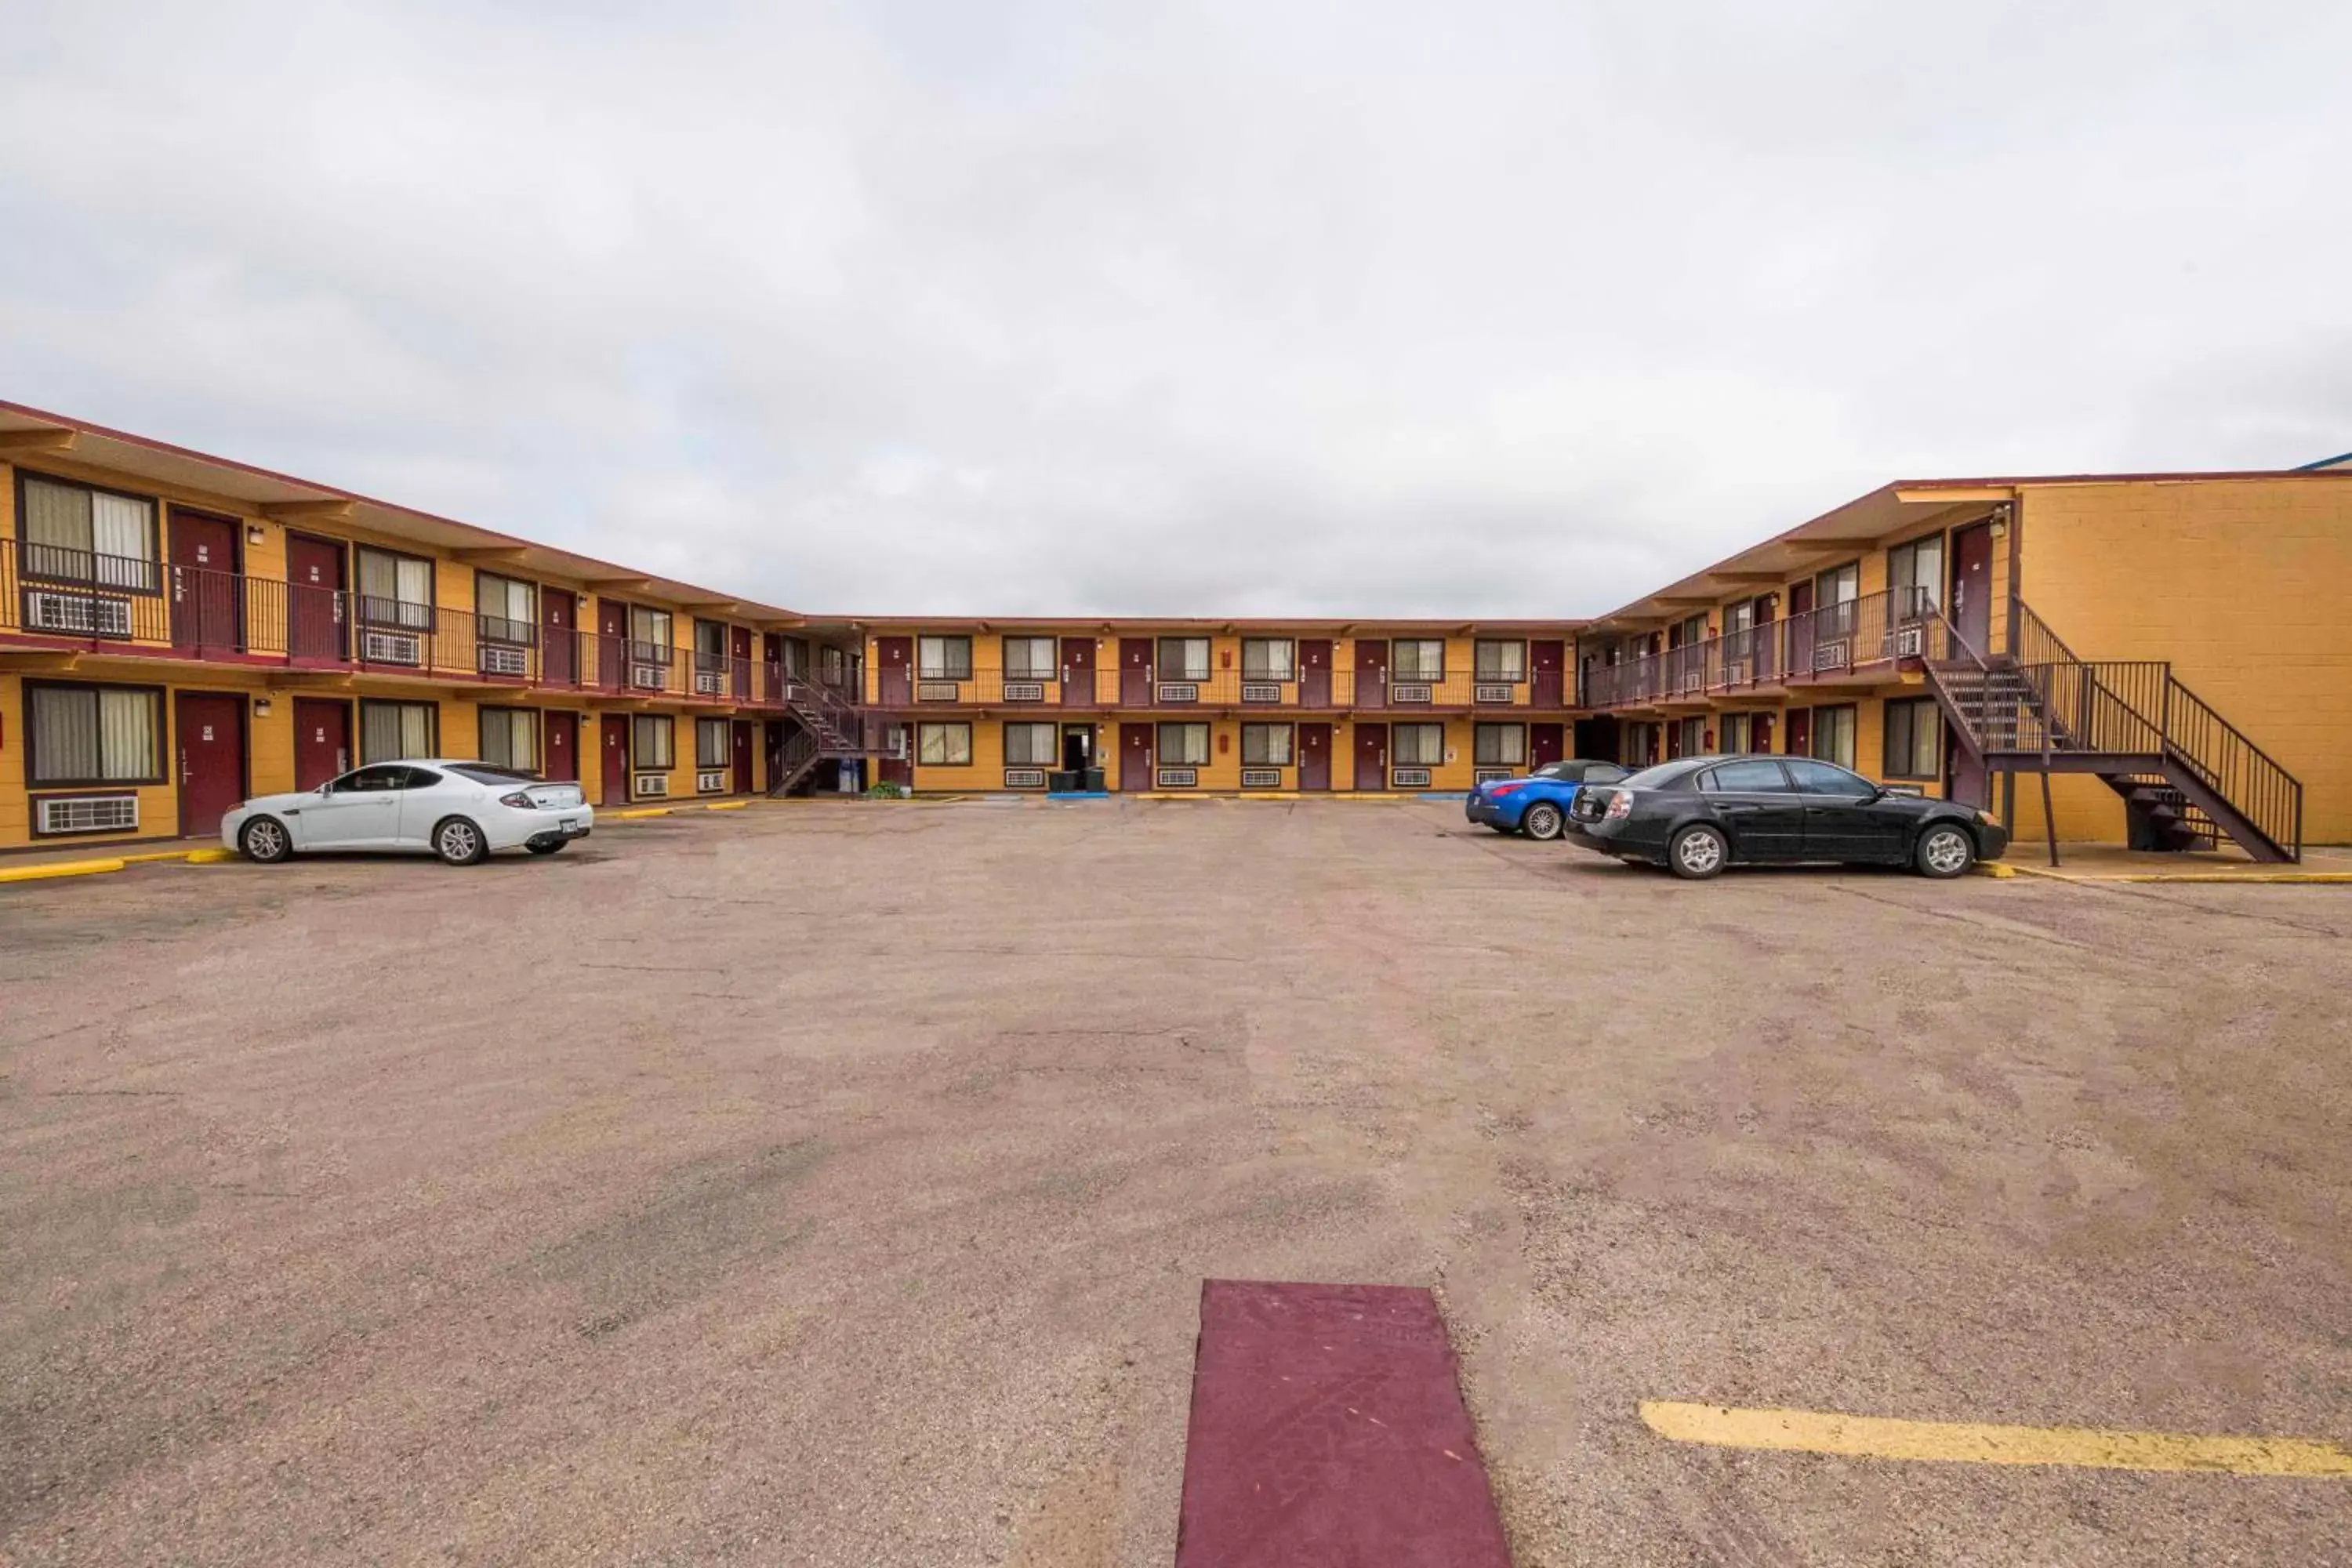 Parking, Property Building in Oyo Hotel Odessa TX, East Business 20